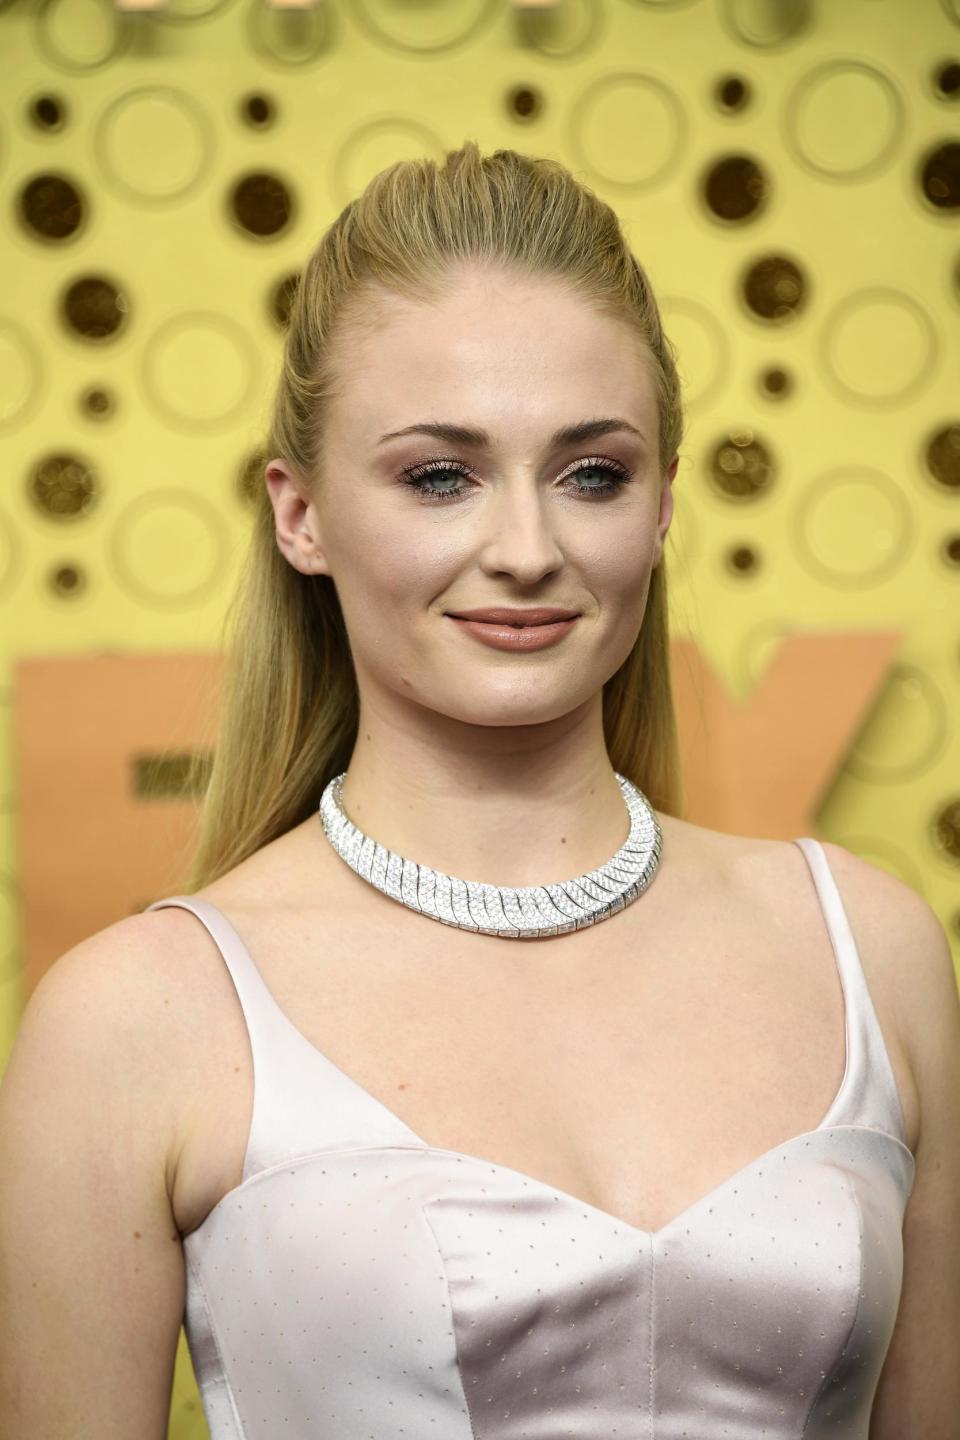 Sophie Turner wearing Louis Vuitton jewellery to the 2019 Emmy Awards (Getty Images)